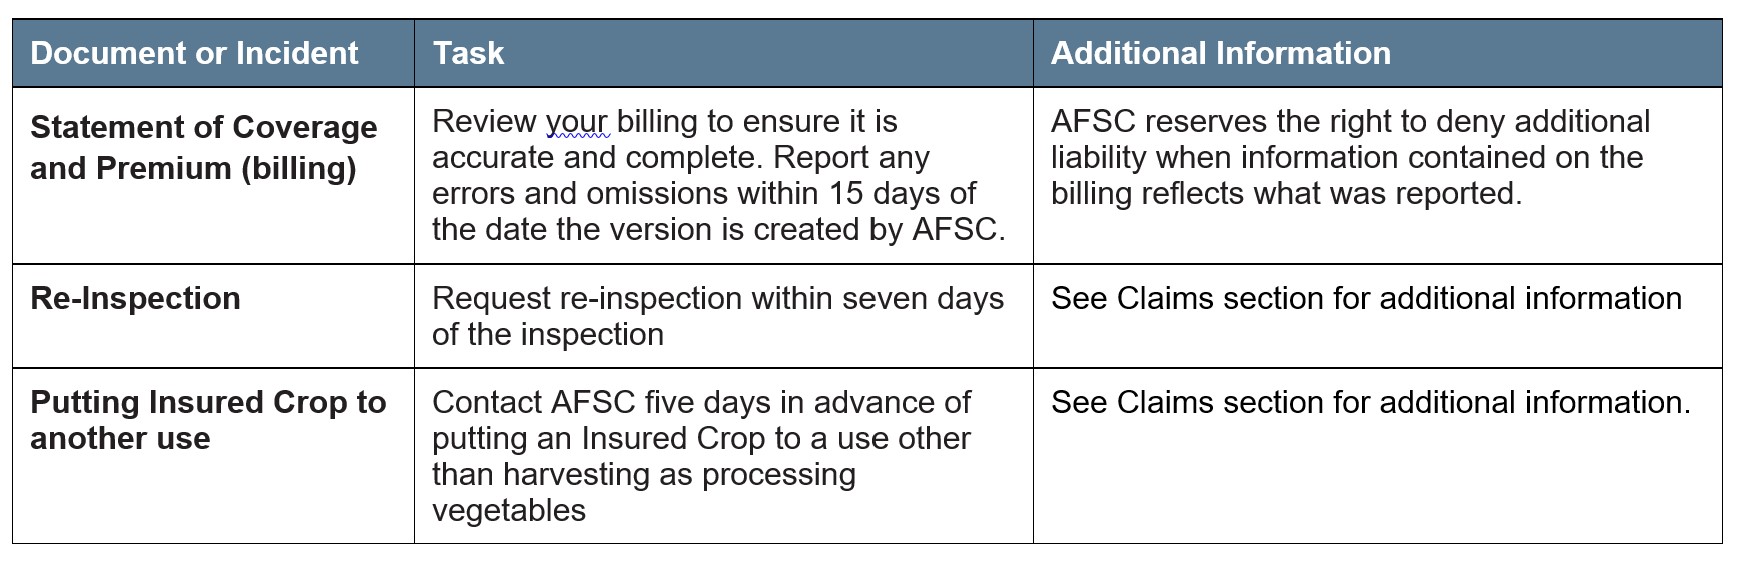 Processing Vegetables Article 4 Other Deadlines Call AFSC for details